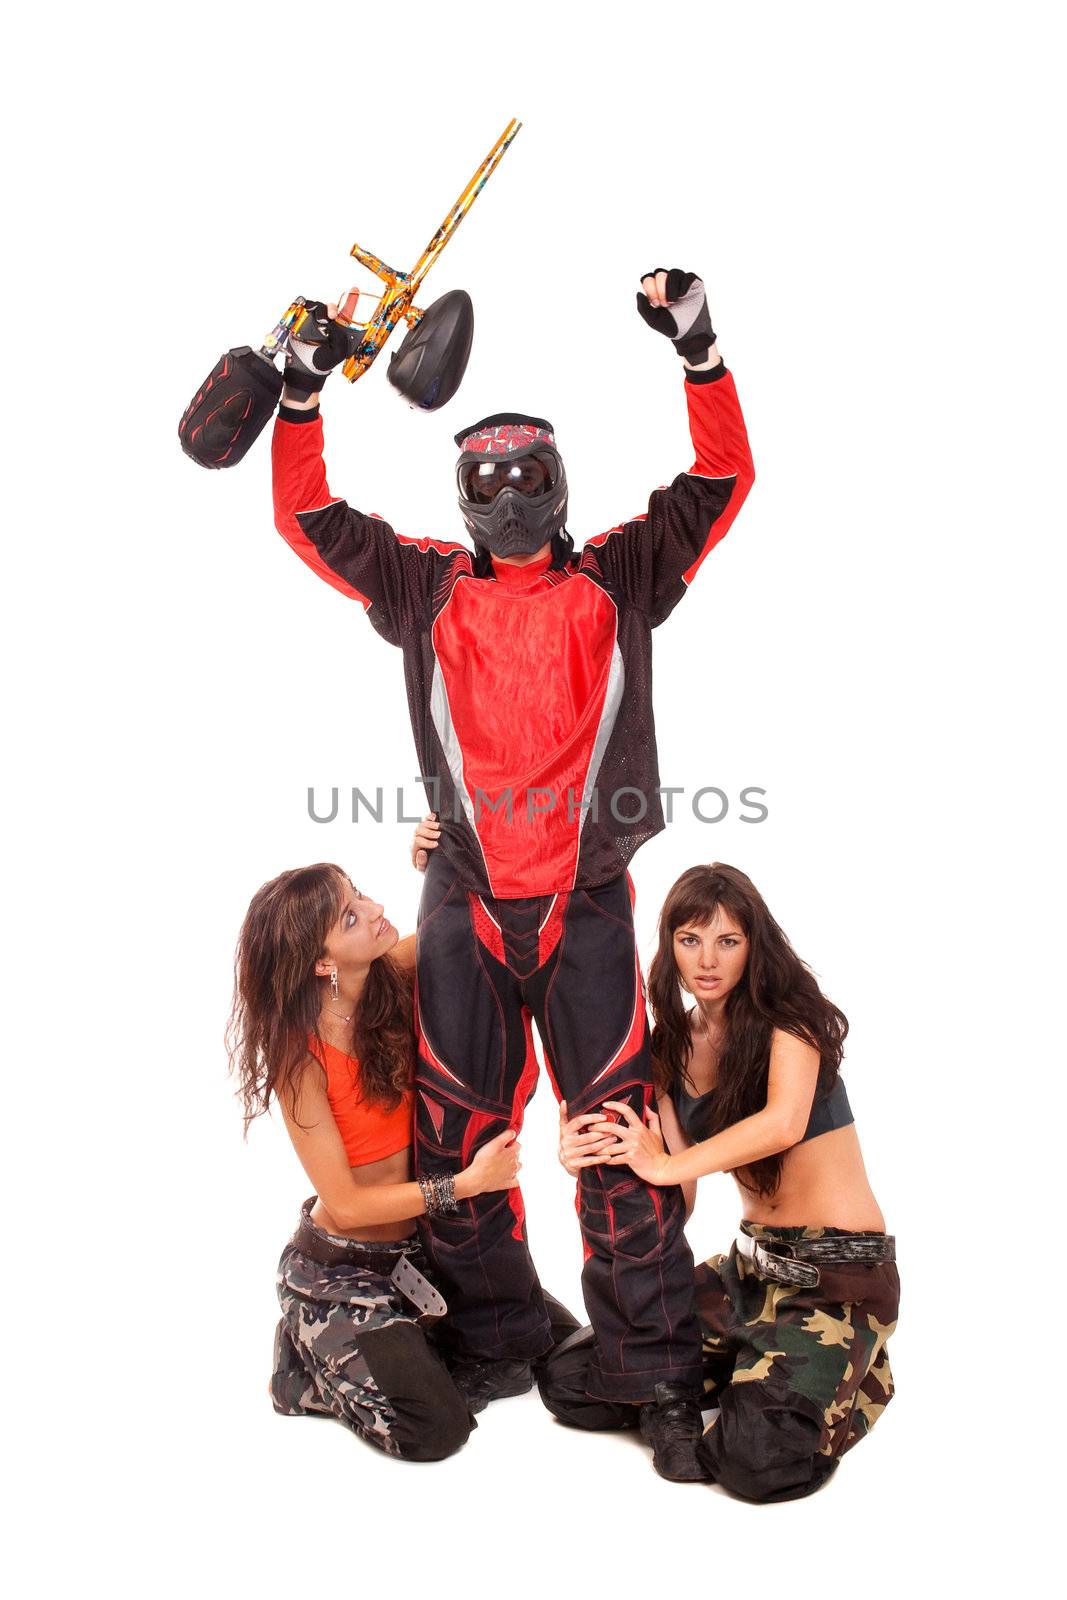 Paintball player with girls on a knees around him